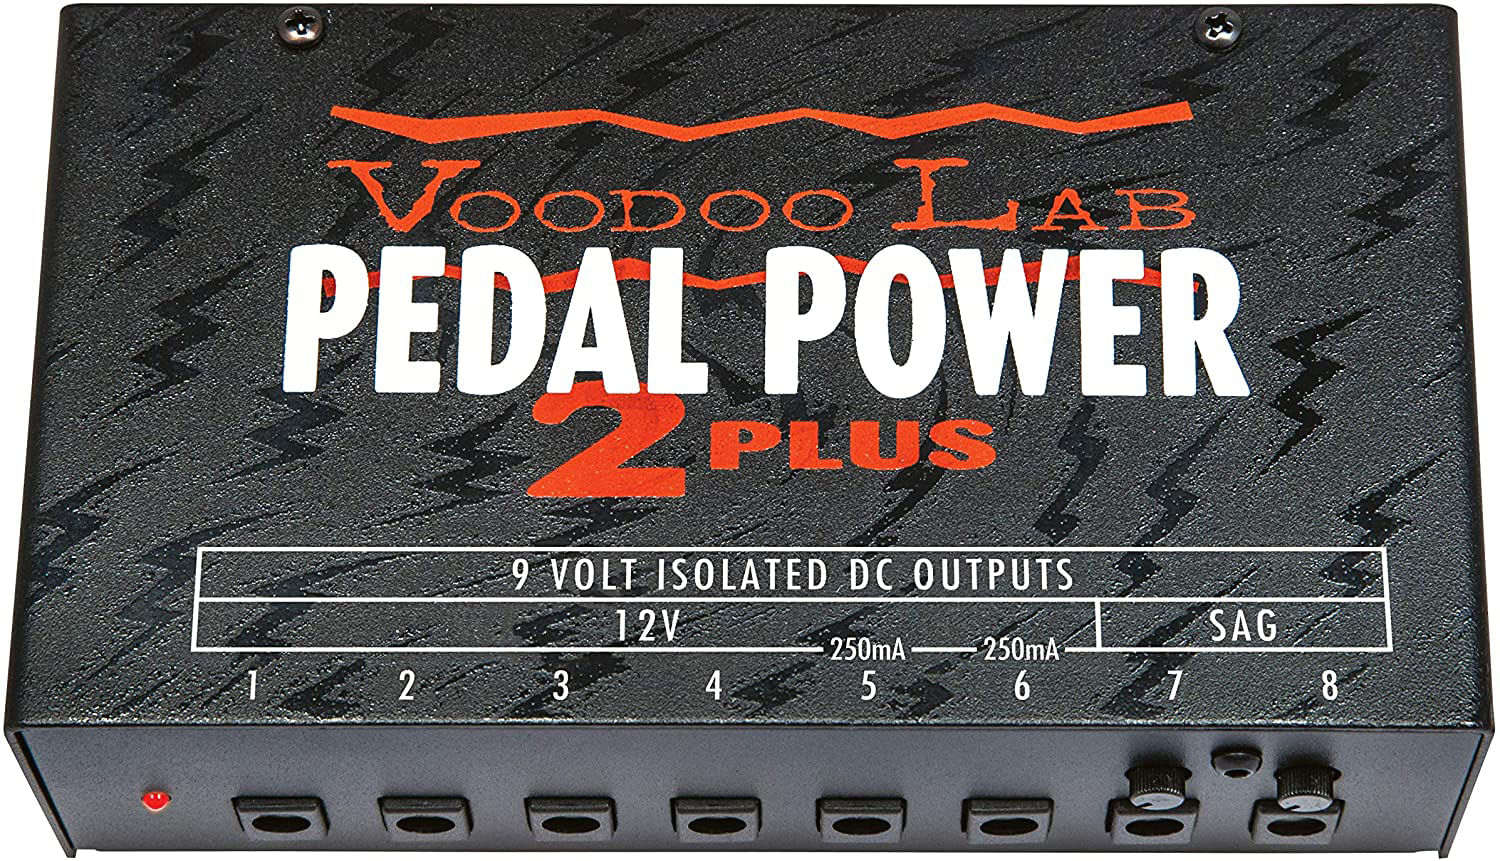 Voodoo Lab Pedal Power 2 PLUS Guitar Pedal Power Supply - Cosmo Music